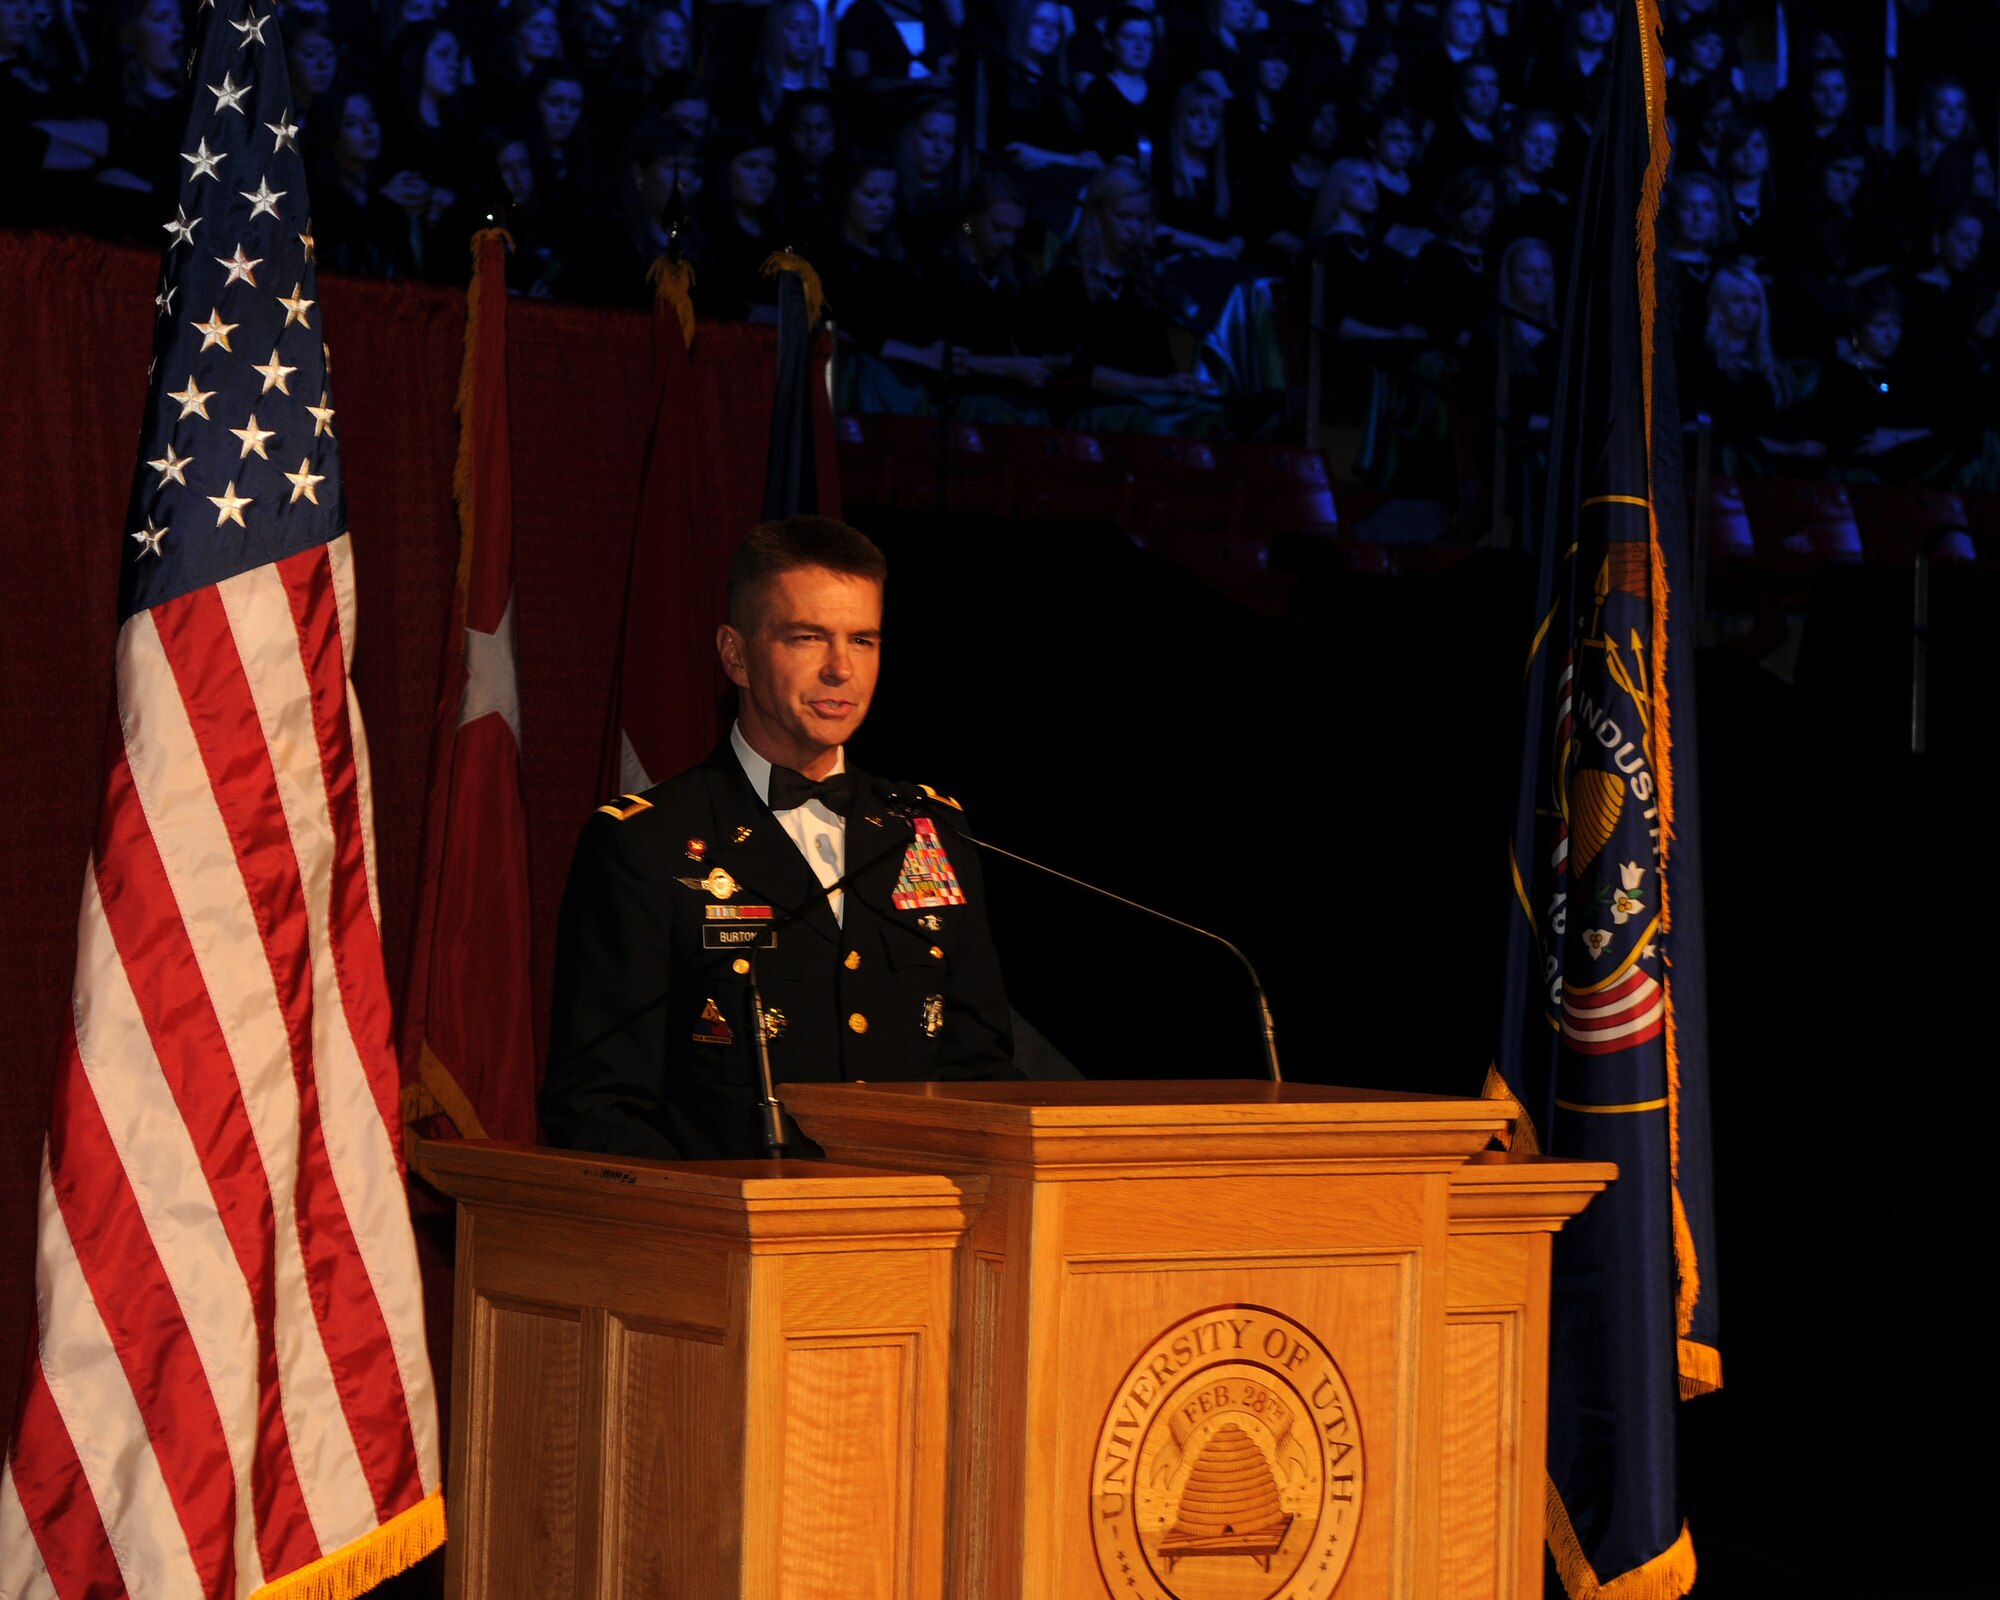 Guest speaker Maj. Gen. Jefferson Burton, the Adjutant General of the Utah National Guard, addressed the audience during the 57th annual Veterans Day concert at the University of Utah's Jon M. Huntsman Center, on Nov. 10. Burton dedicated the night's performance to veterans who served in the past, and to veterans who are currently in harm's way. (U.S. Air Force photo by Senior Airman Lillian Harnden)(RELEASED)